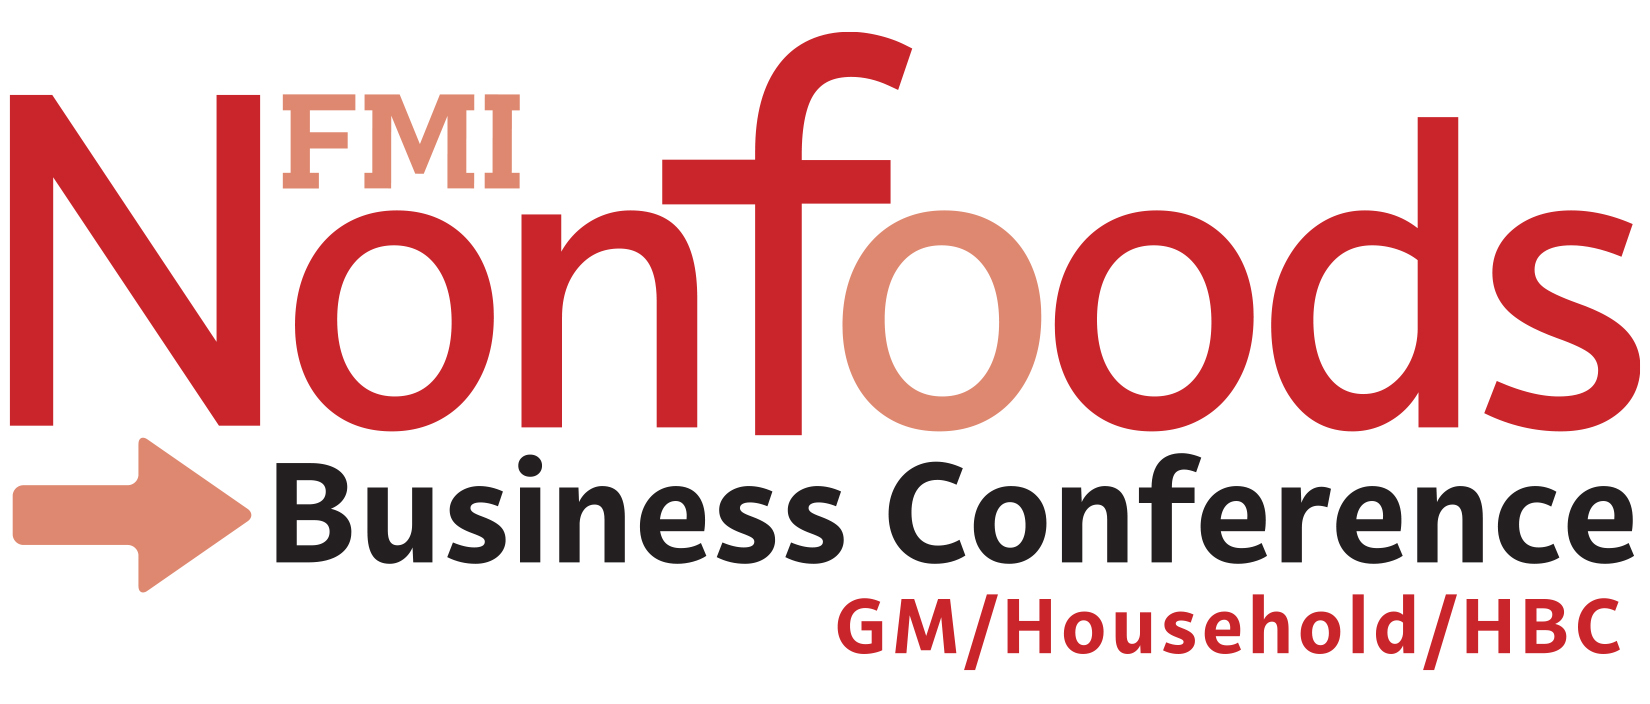 FMI Nonfoods Business Conference logo